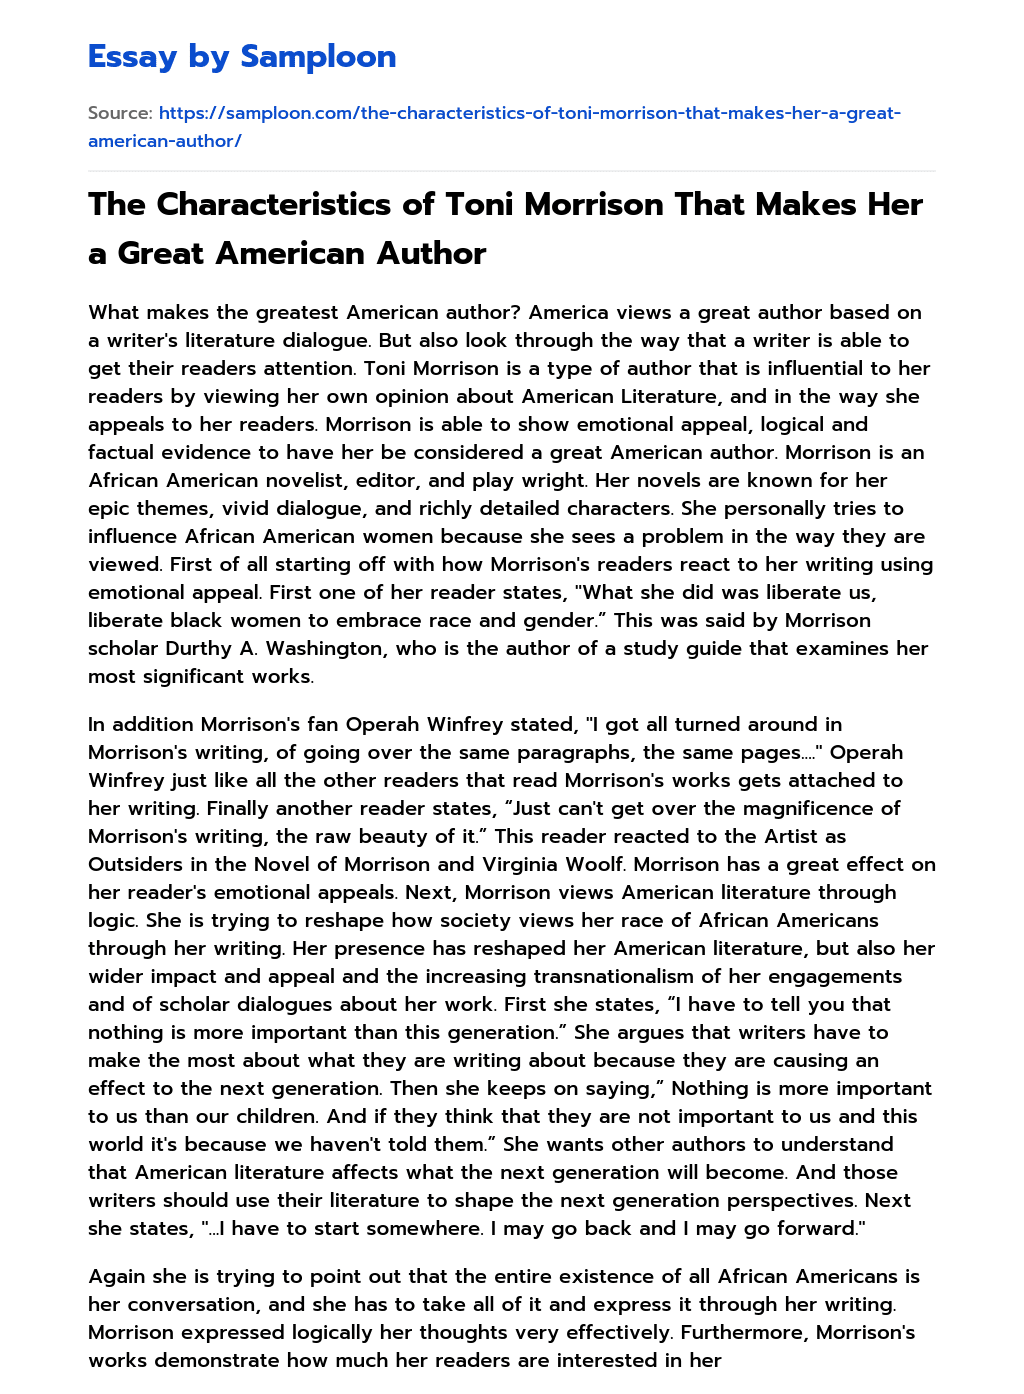 The Characteristics of Toni Morrison That Makes Her a Great American Author essay